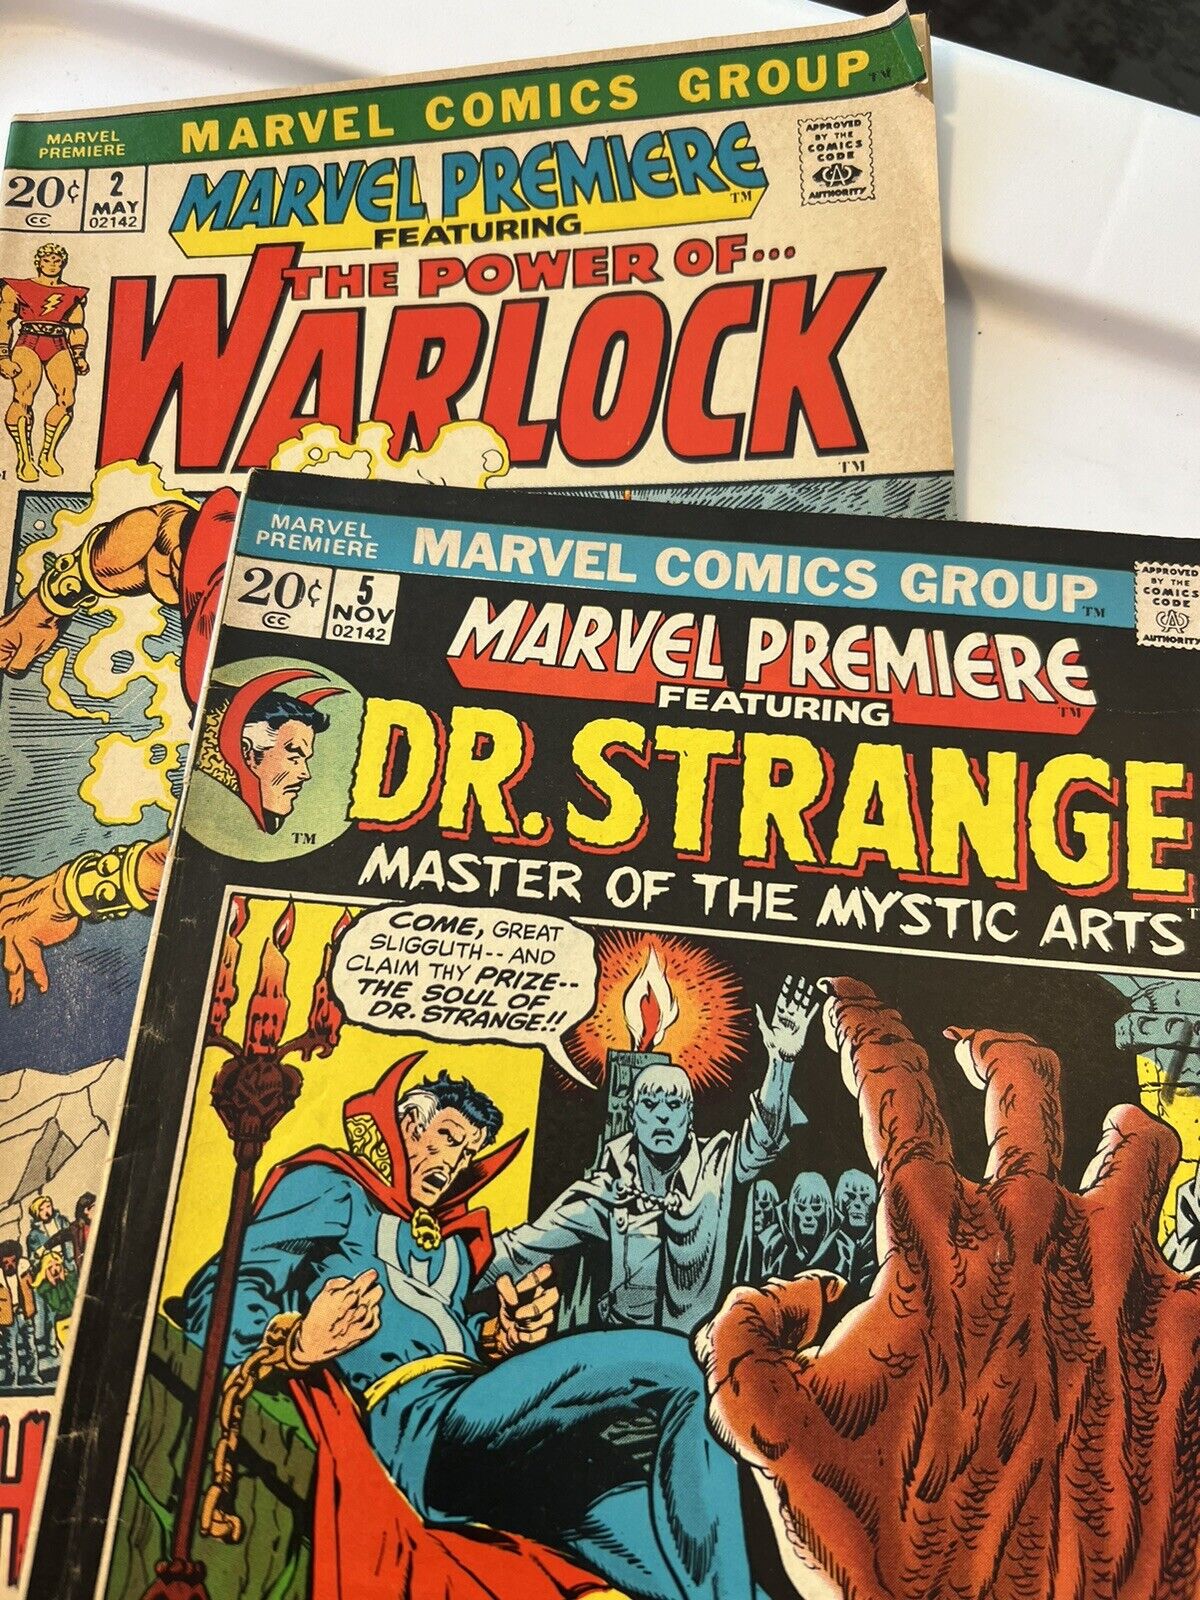 Marvel Premier #2 And 5 The Power Of The Warlock, And Doctor Strange (Lot Of 2)